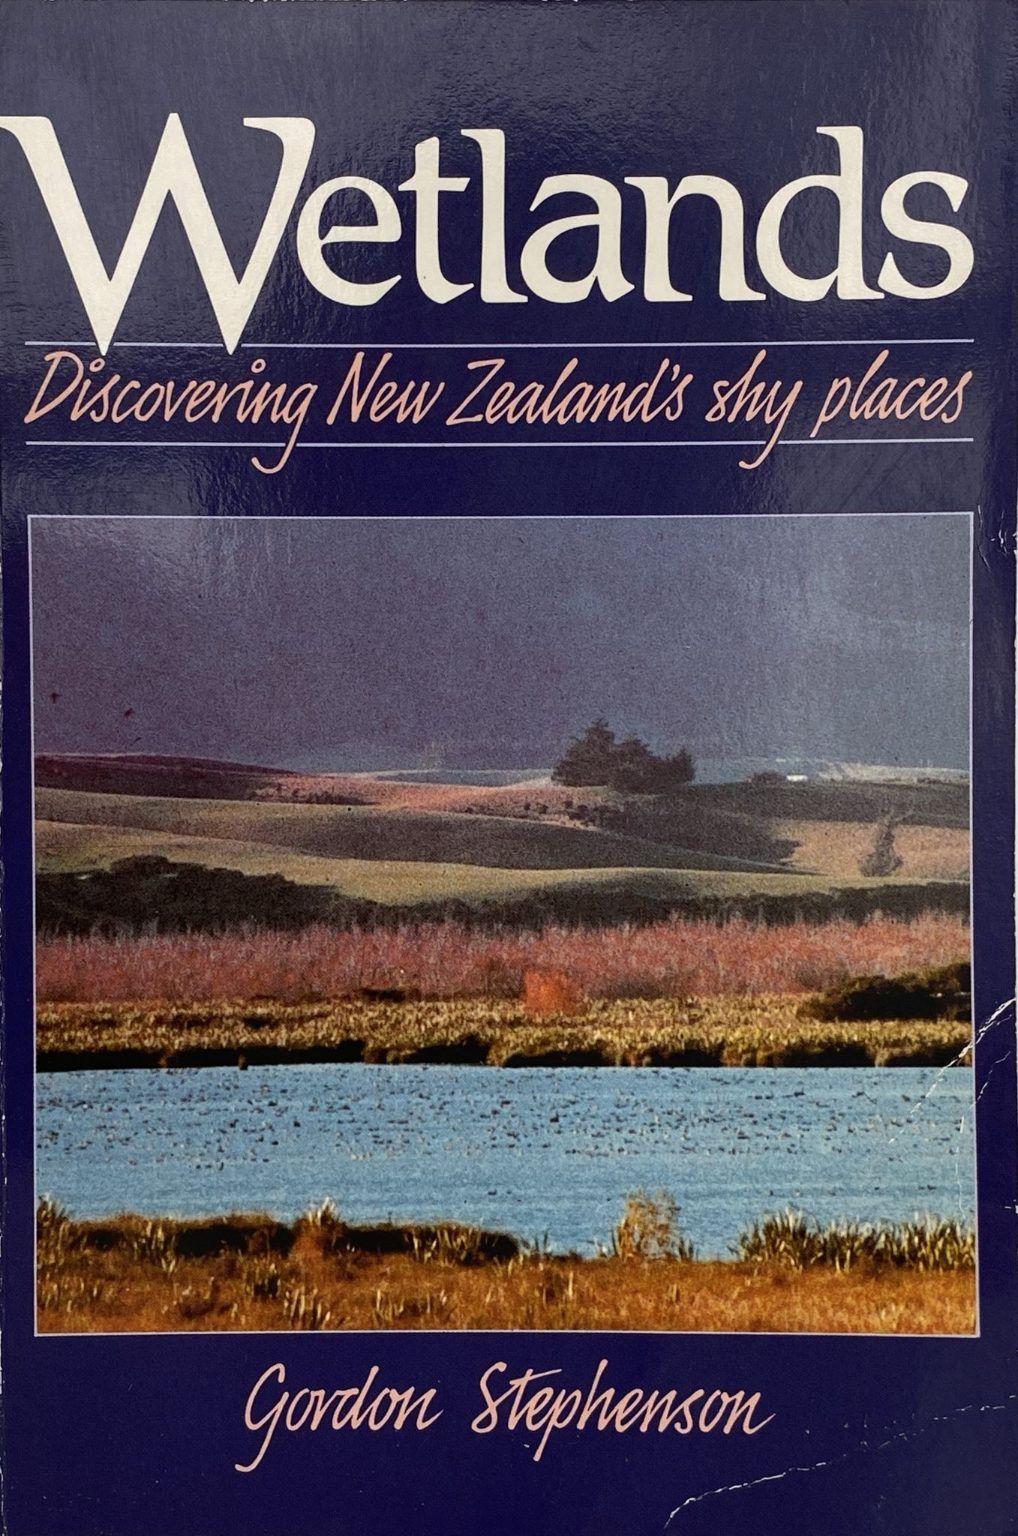 WETLANDS: Discovering New Zealand's Shy Places